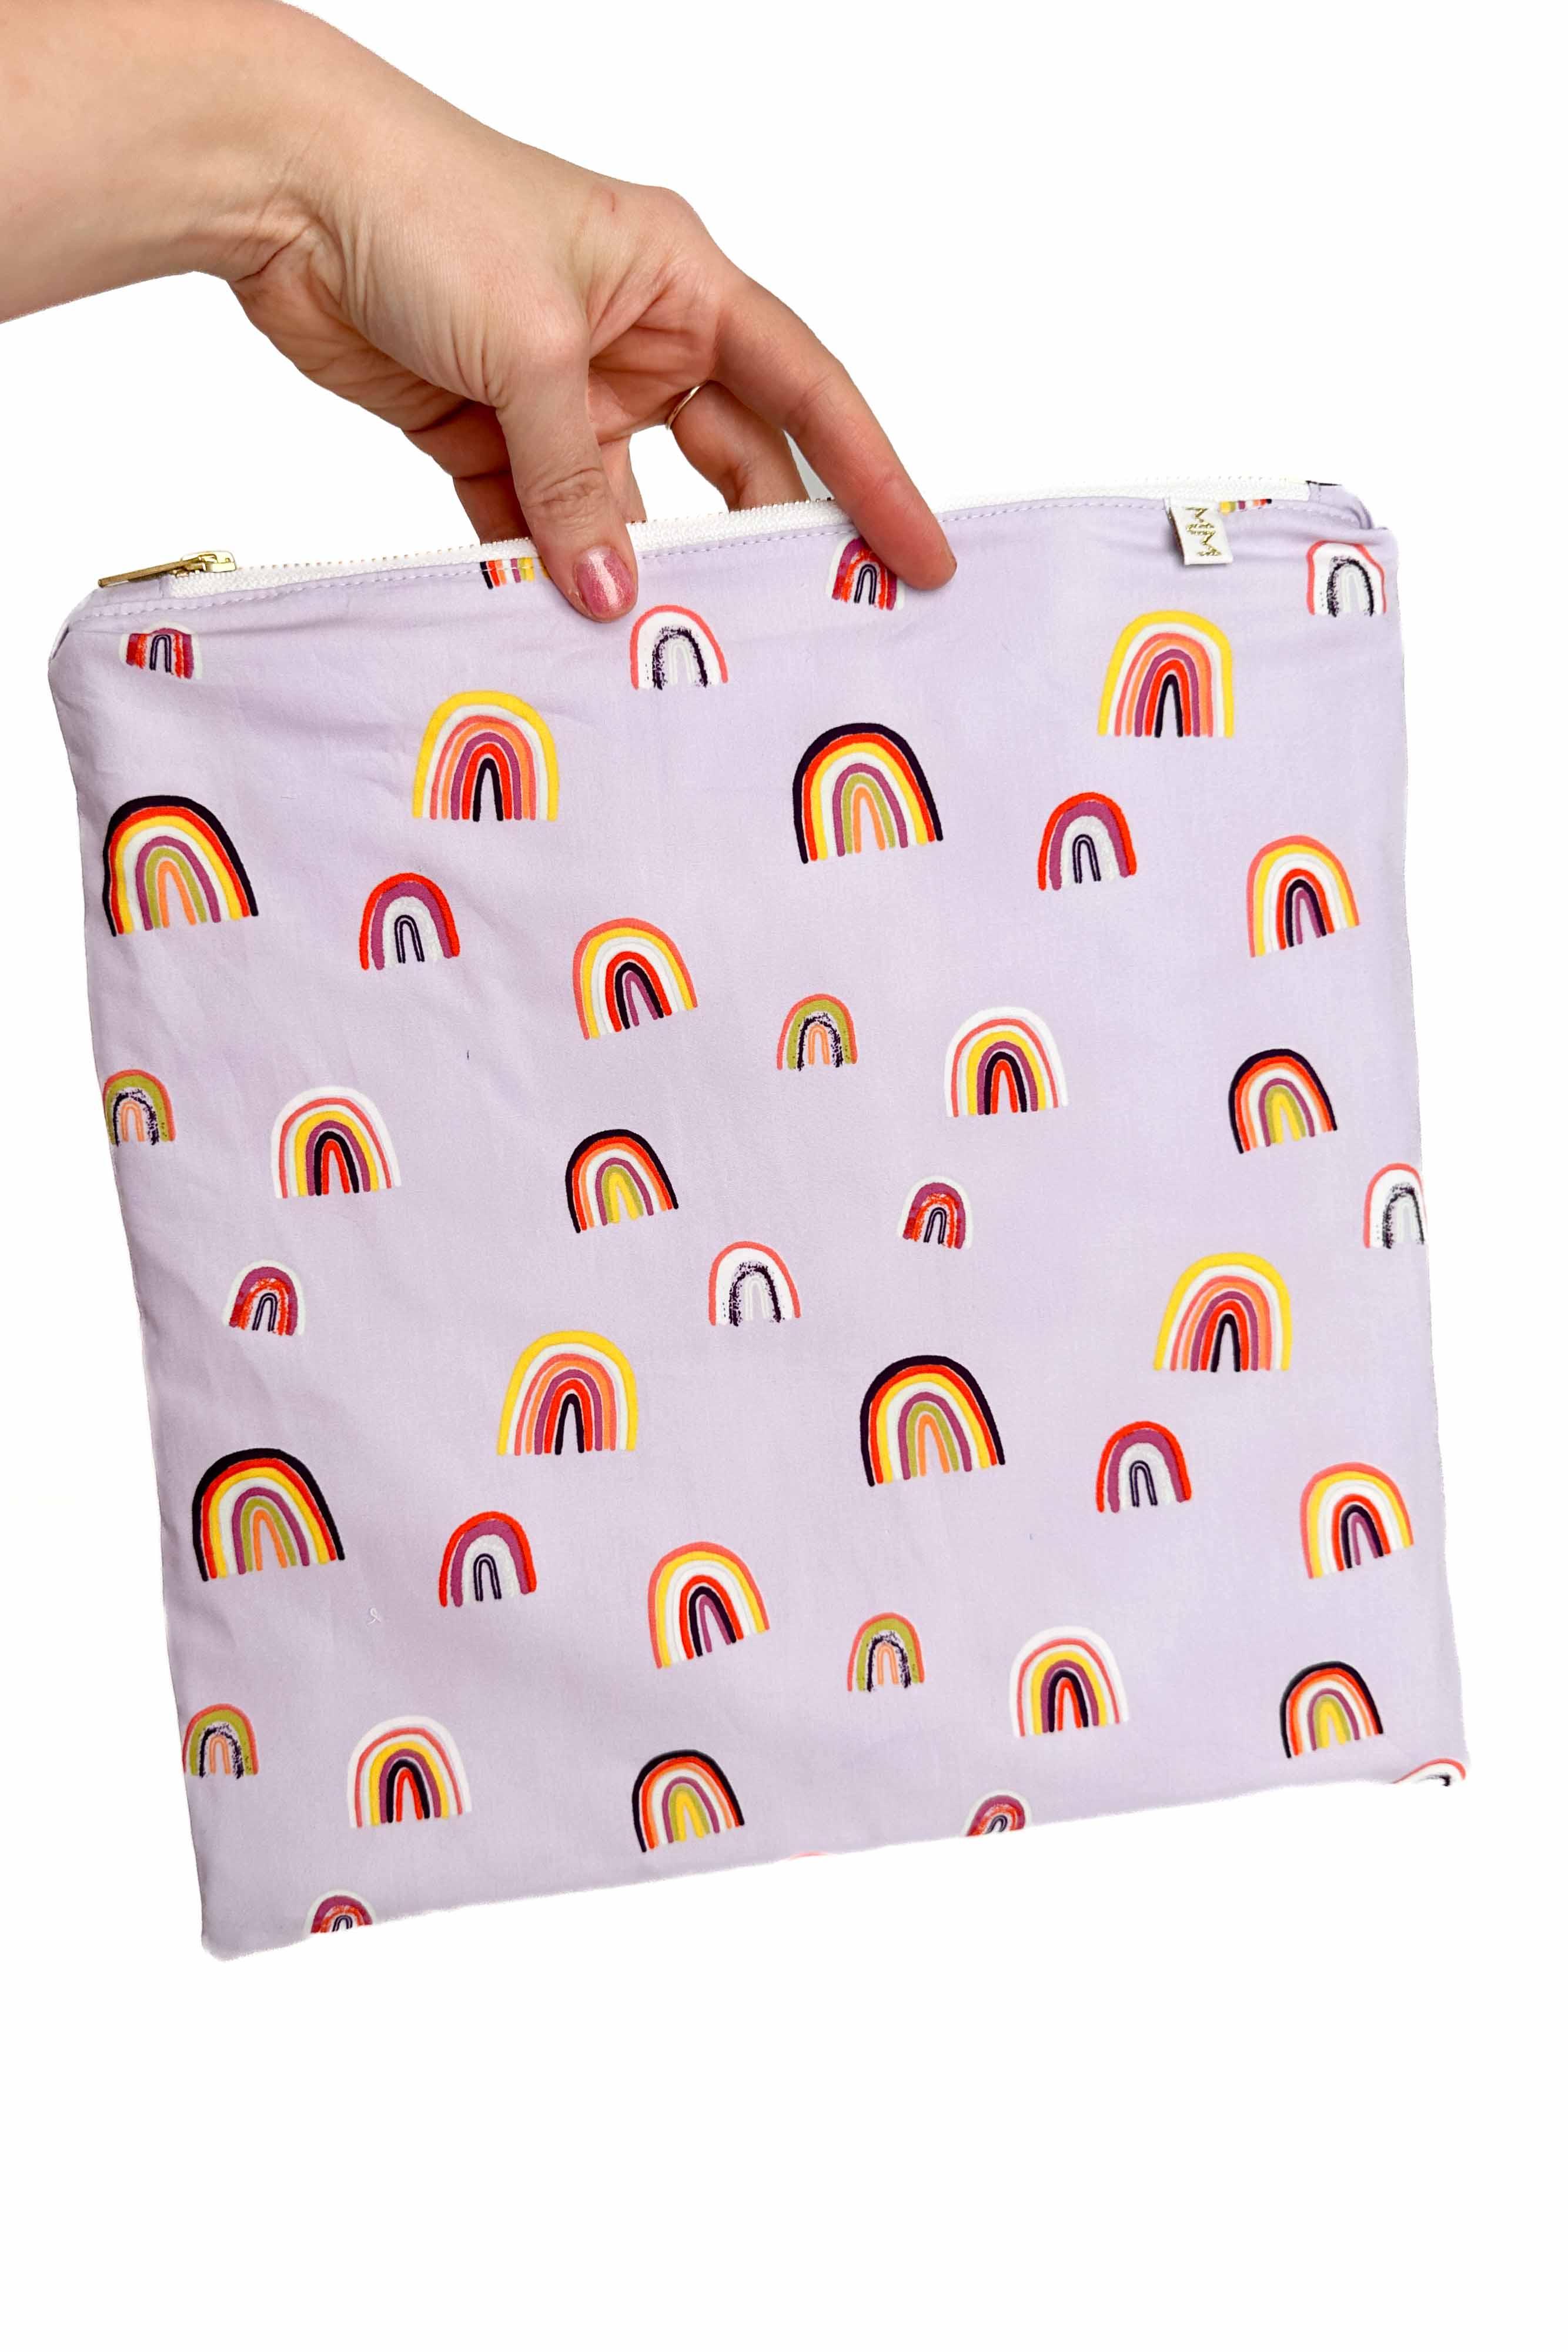 Rainbow Dreams Large Wet Bag READY TO SHIP - Modern Makerie